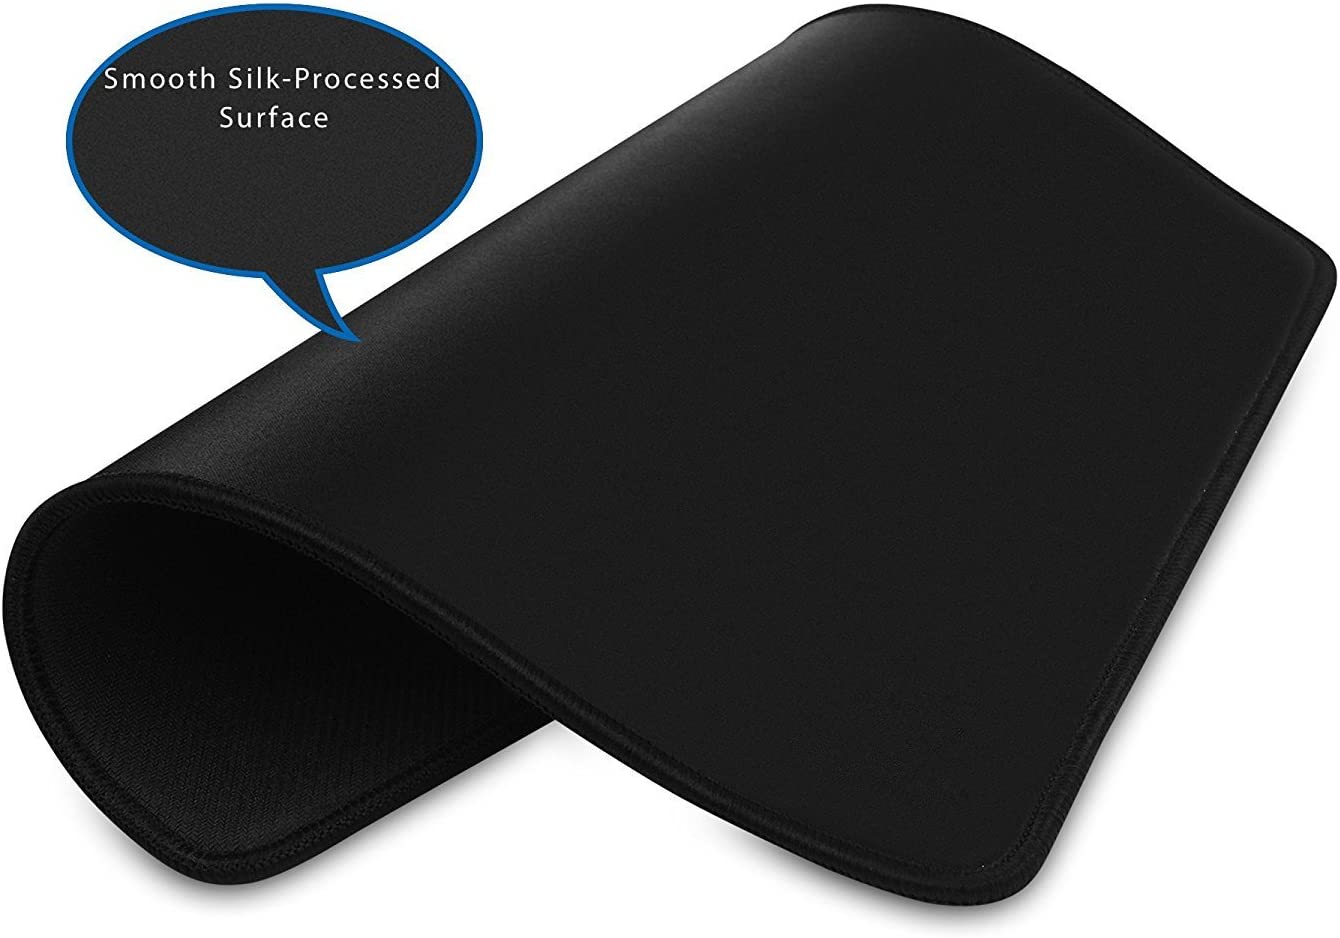 A mouse pad that has a silk-like surface will allow for superior tracking performance for your gaming mouse.